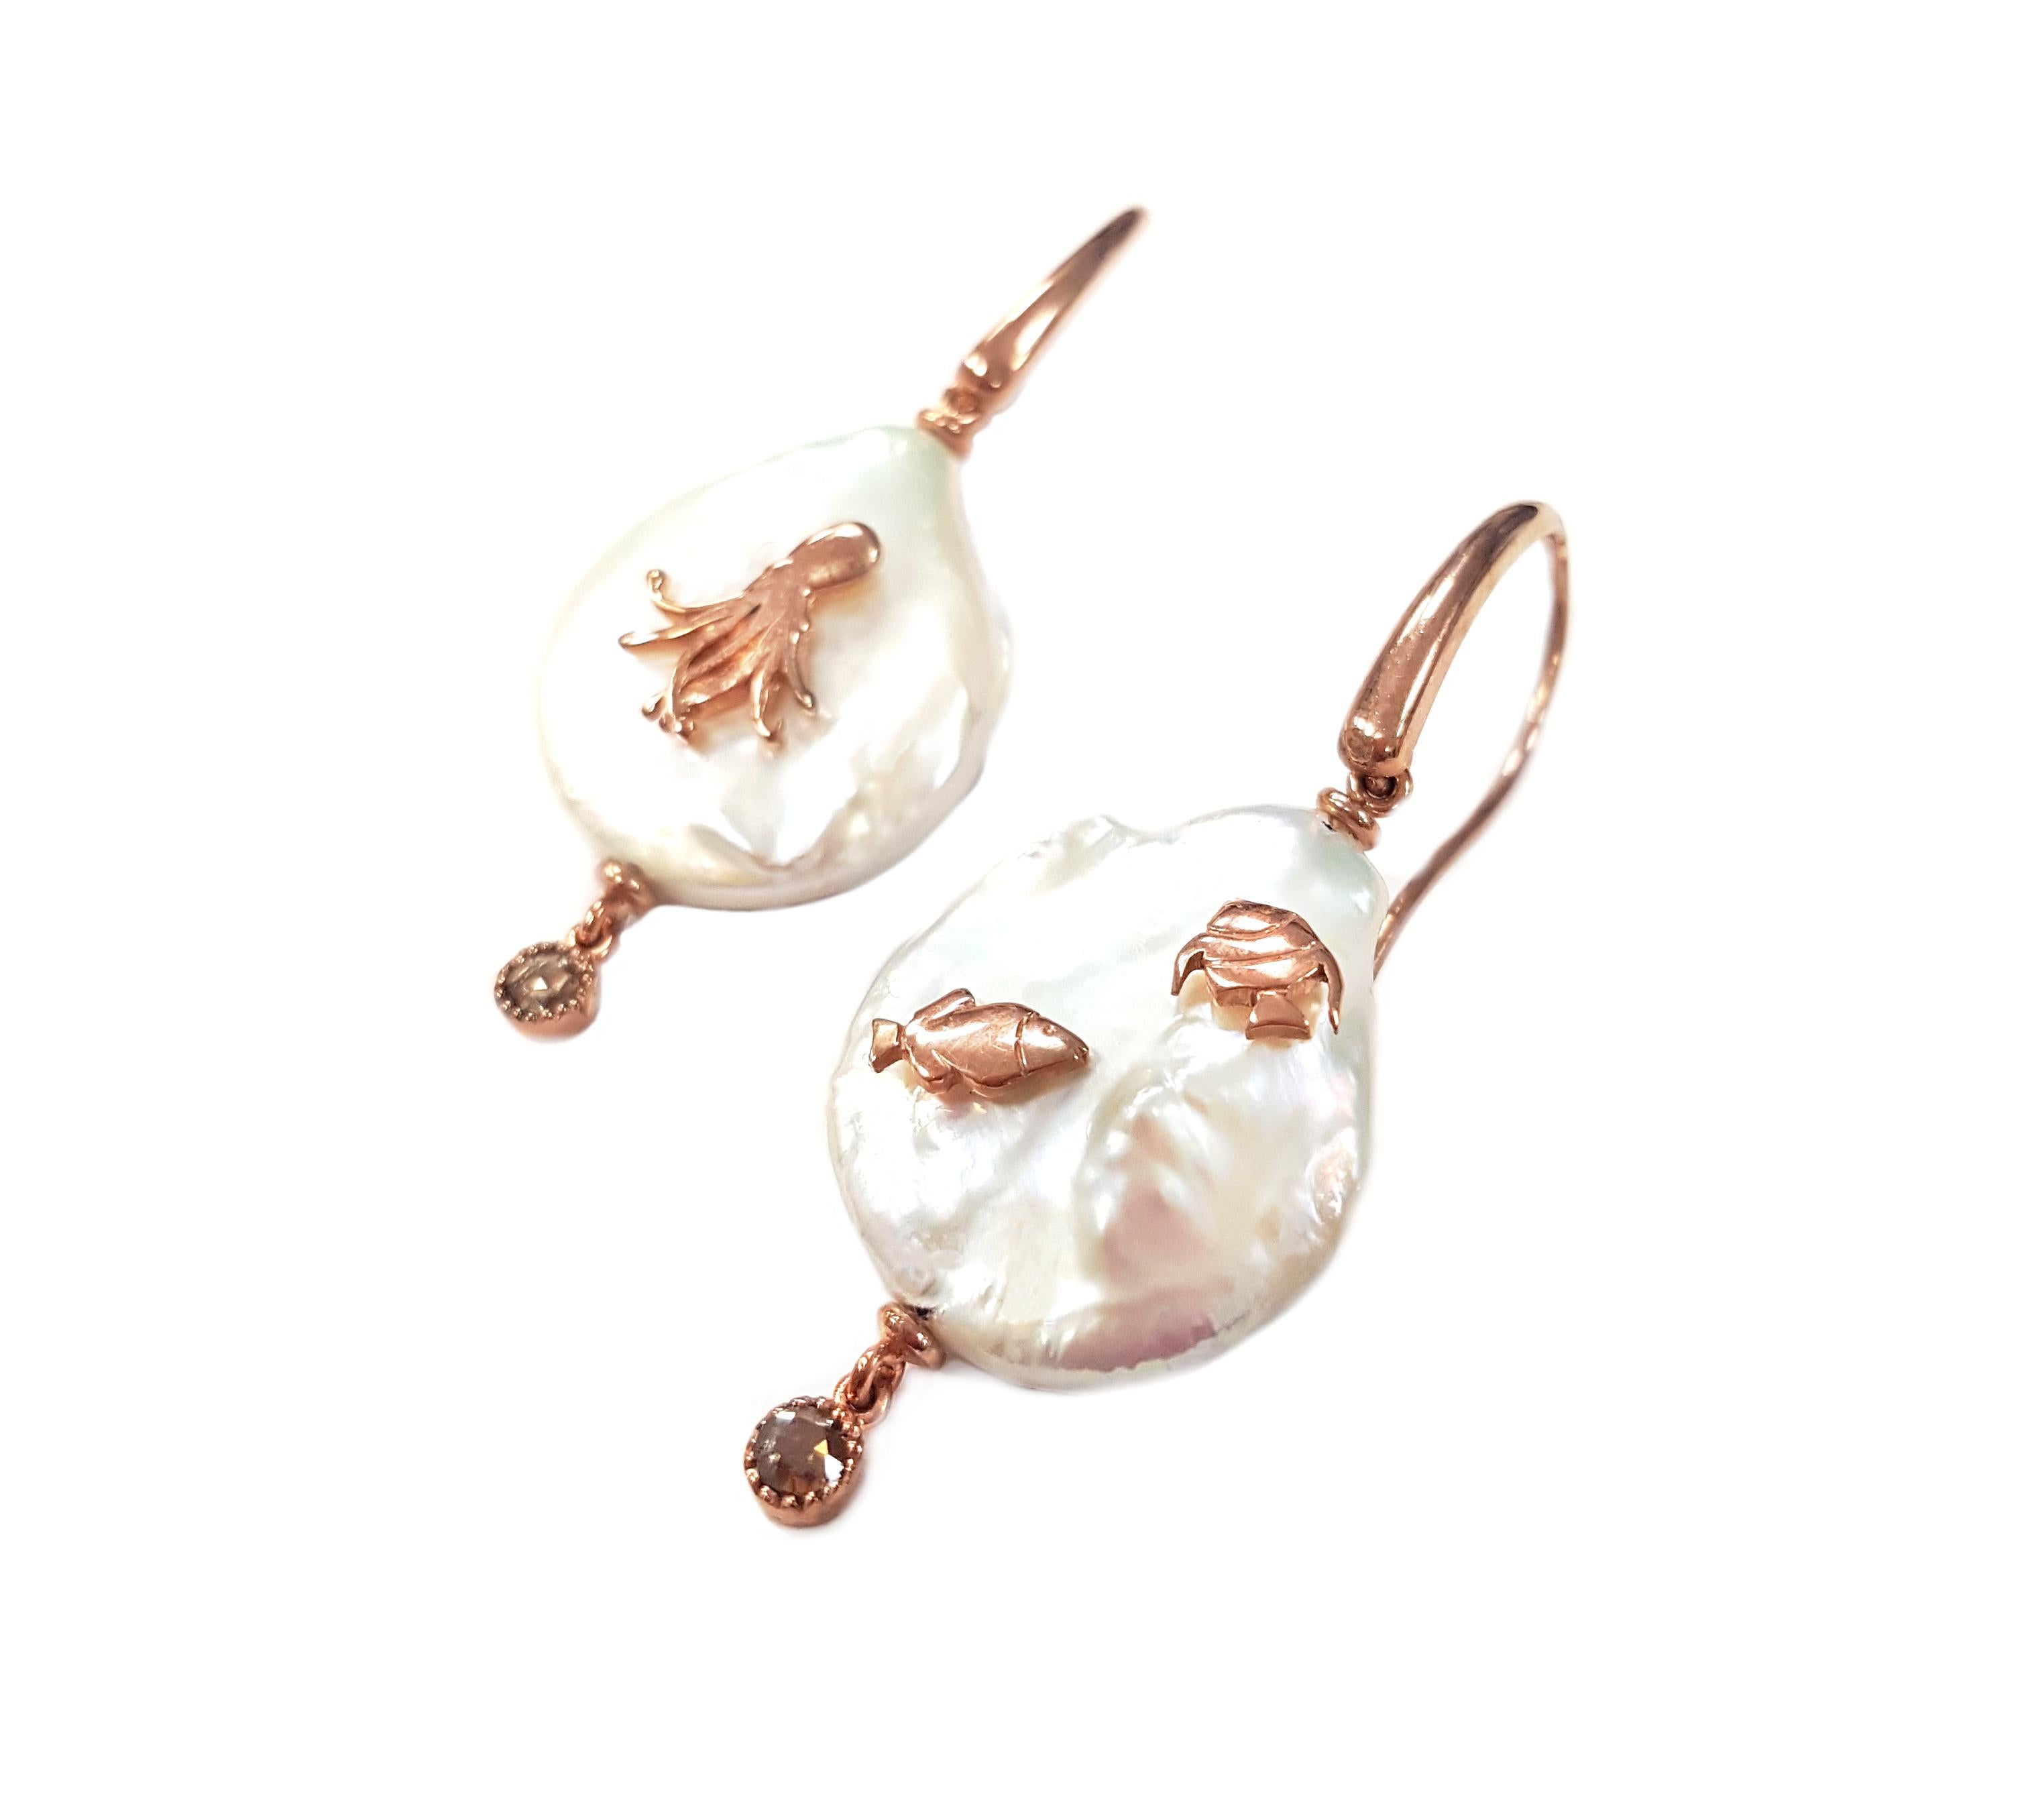 These delightfully whimsical earrings feature three 3-dimensional sea creatures created from 18-karat rose gold: an octopus and two fish are silhouetted against a luminous pearl. They are masterfully hand-made and feature a single rose-cut diamond,